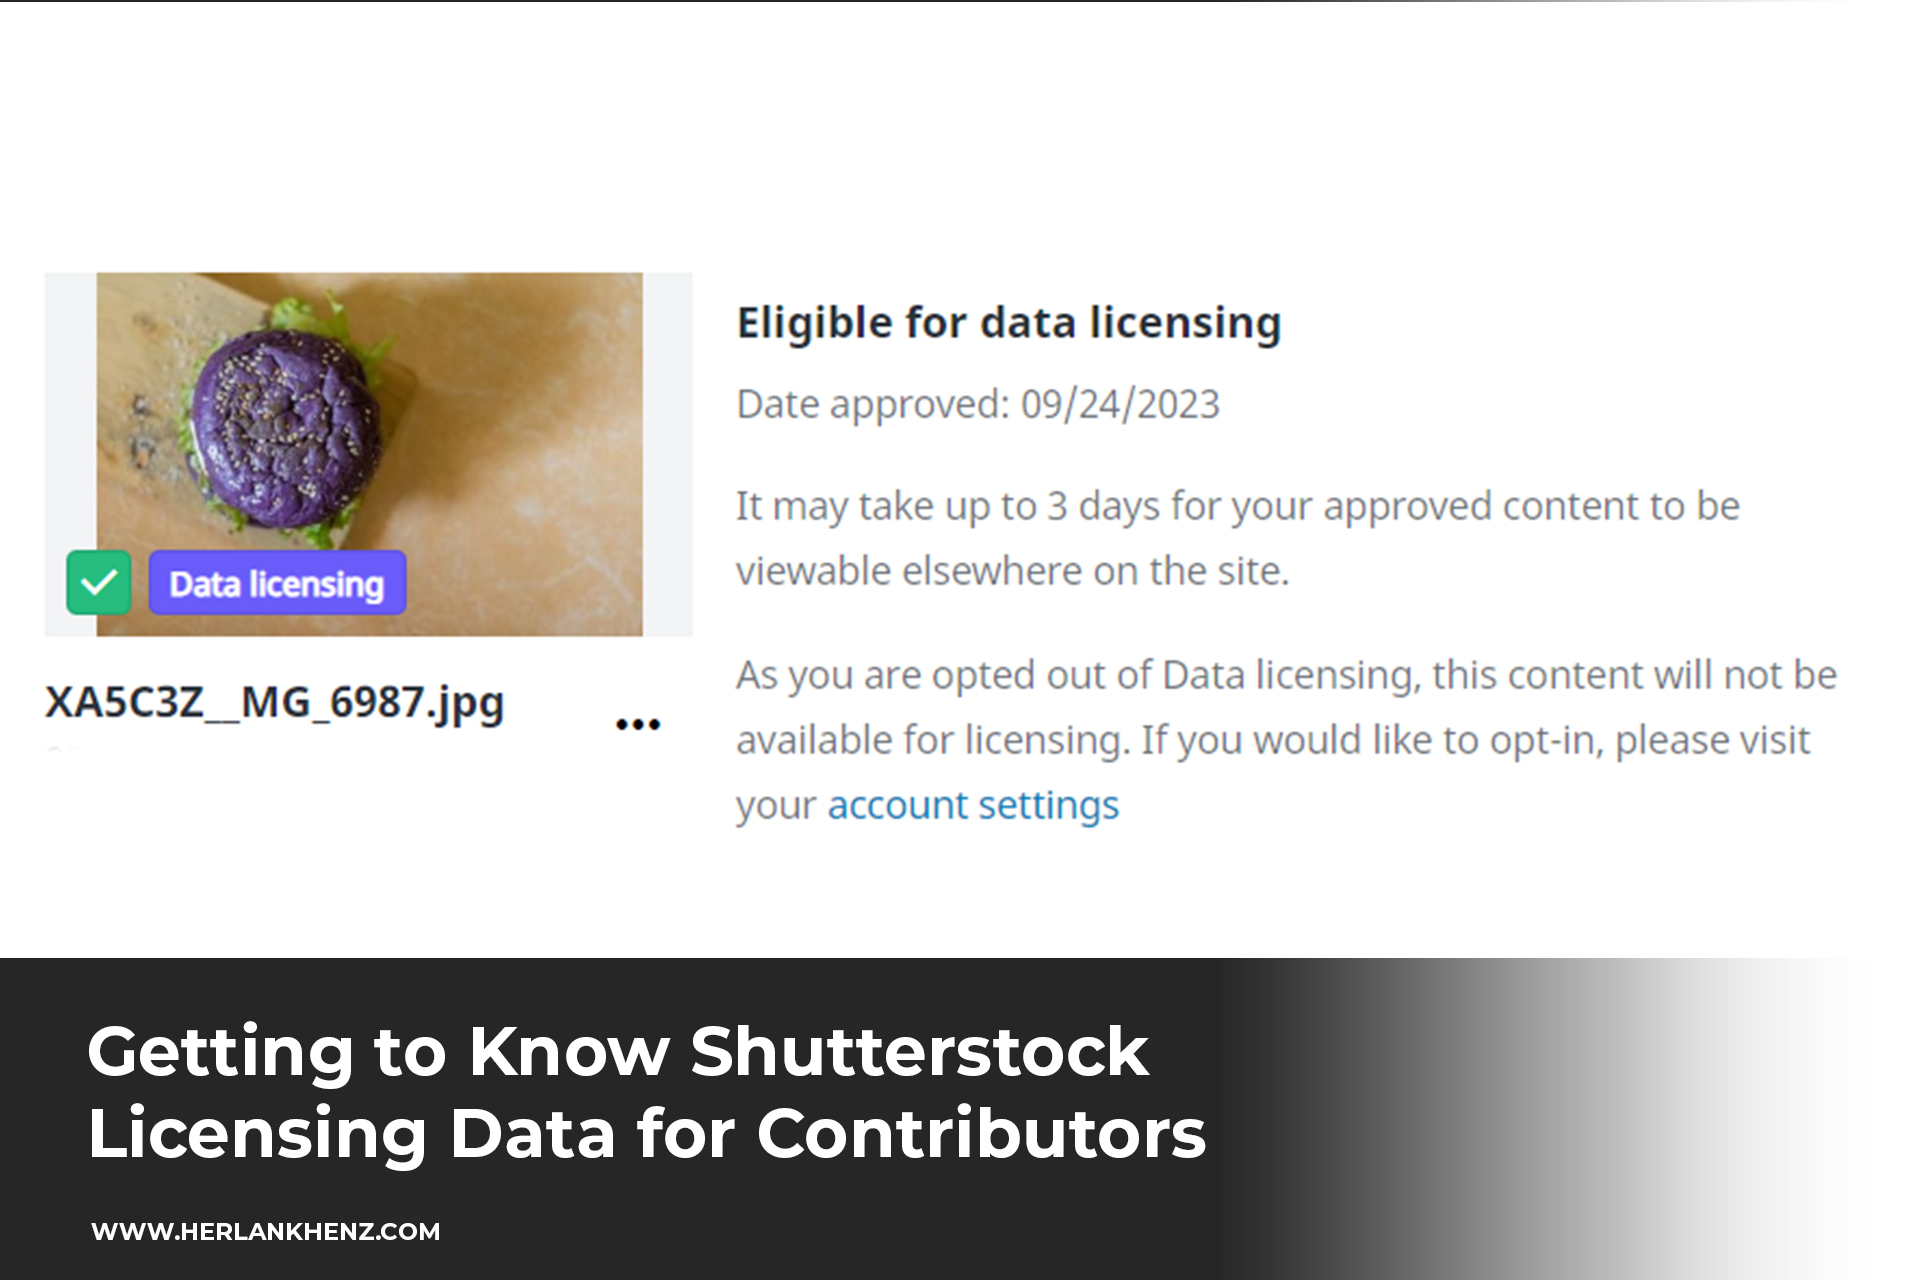 Getting to Know Shutterstock Licensing Data for Contributors